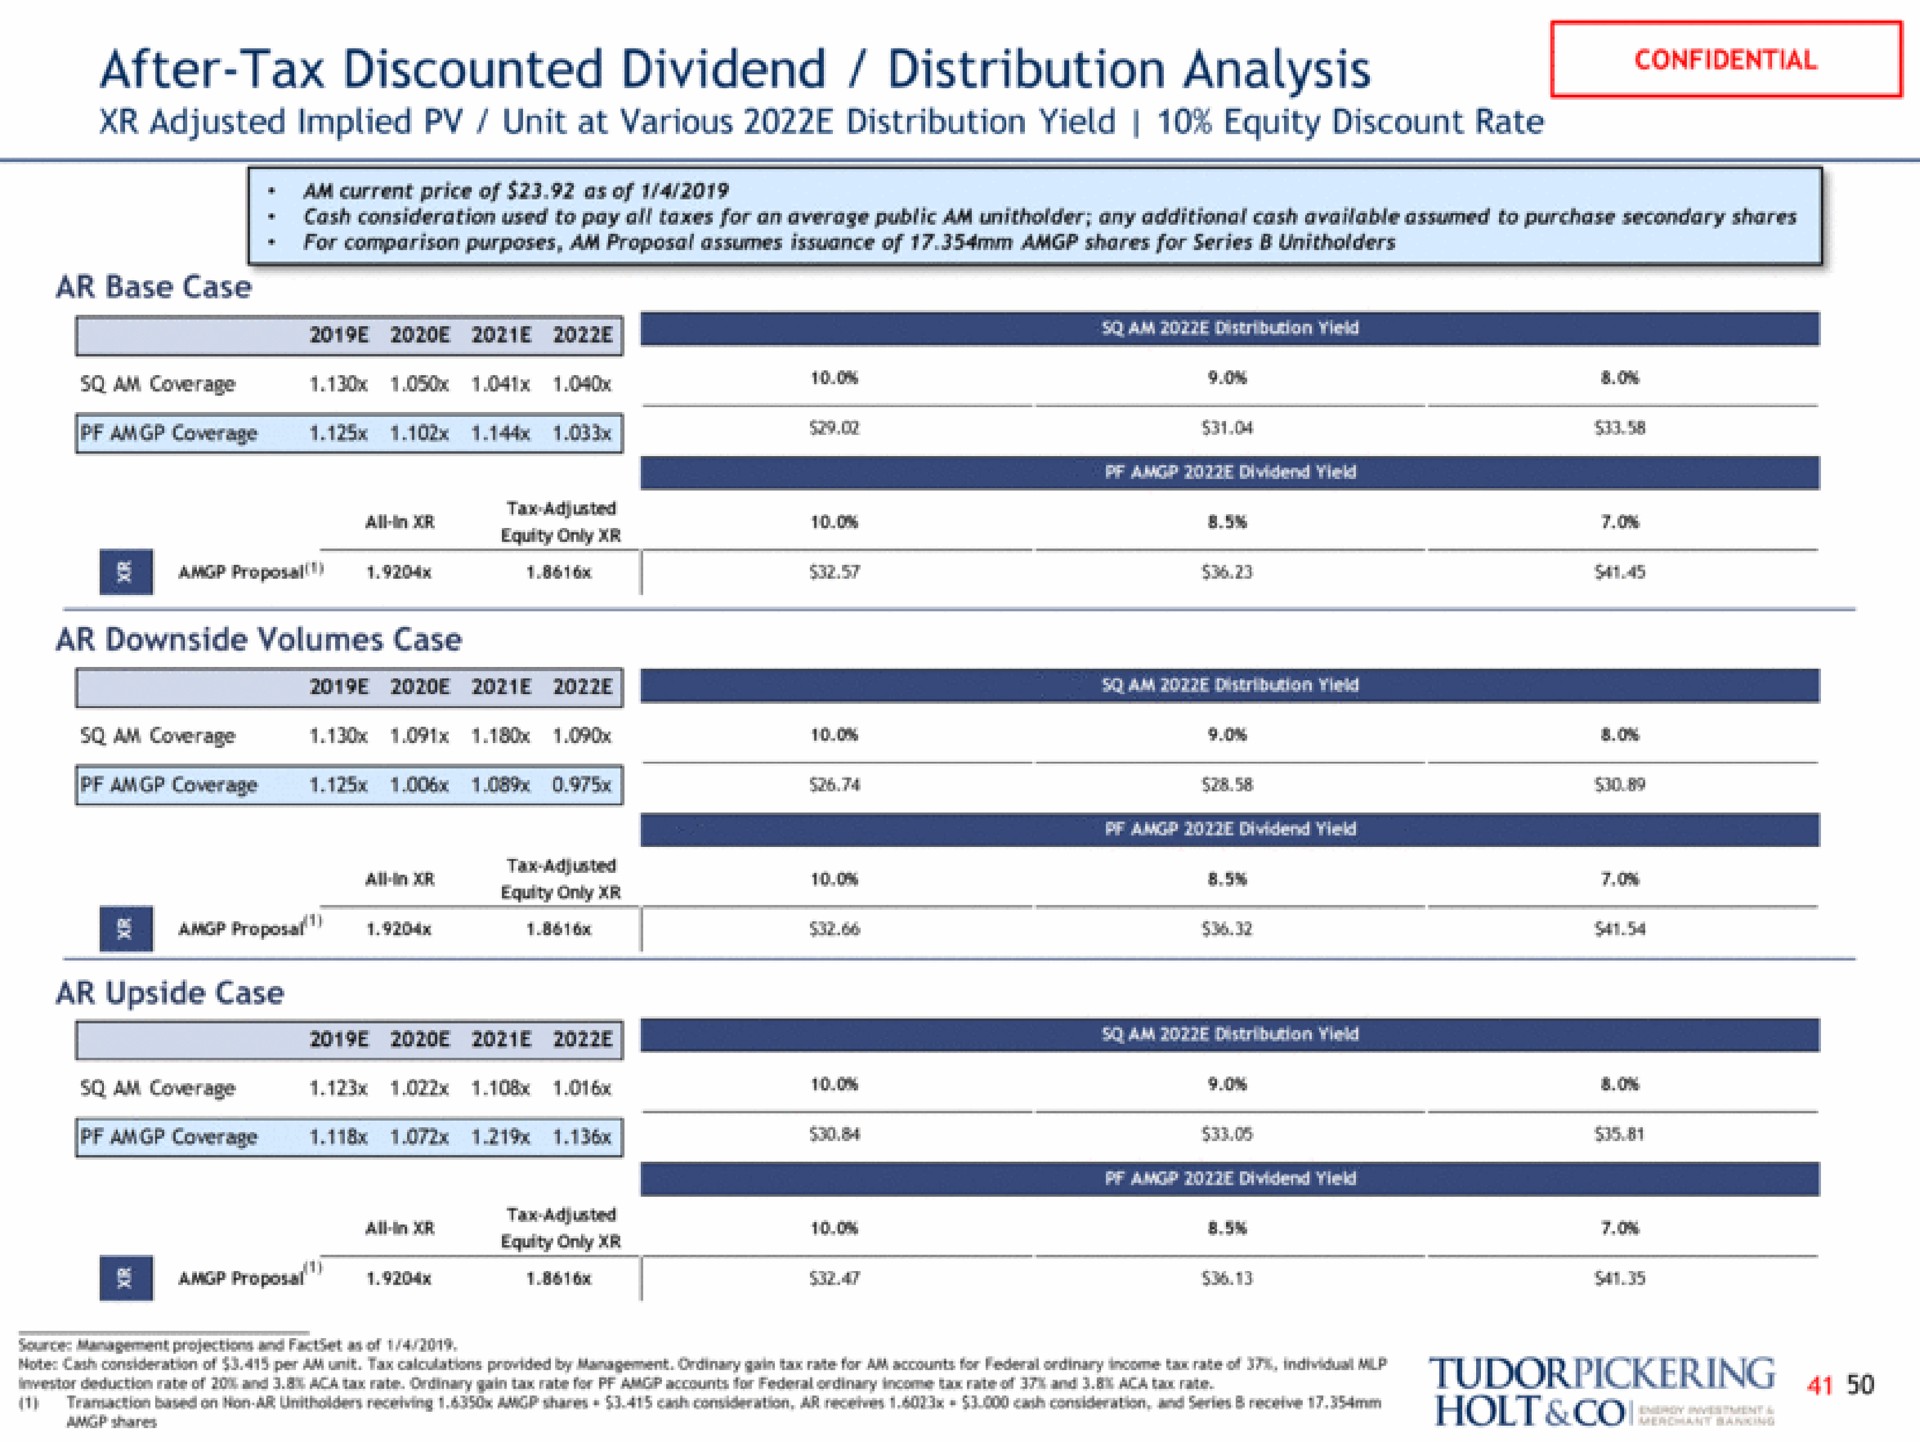 after tax discounted dividend distribution analysis holt shares | Tudor, Pickering, Holt & Co